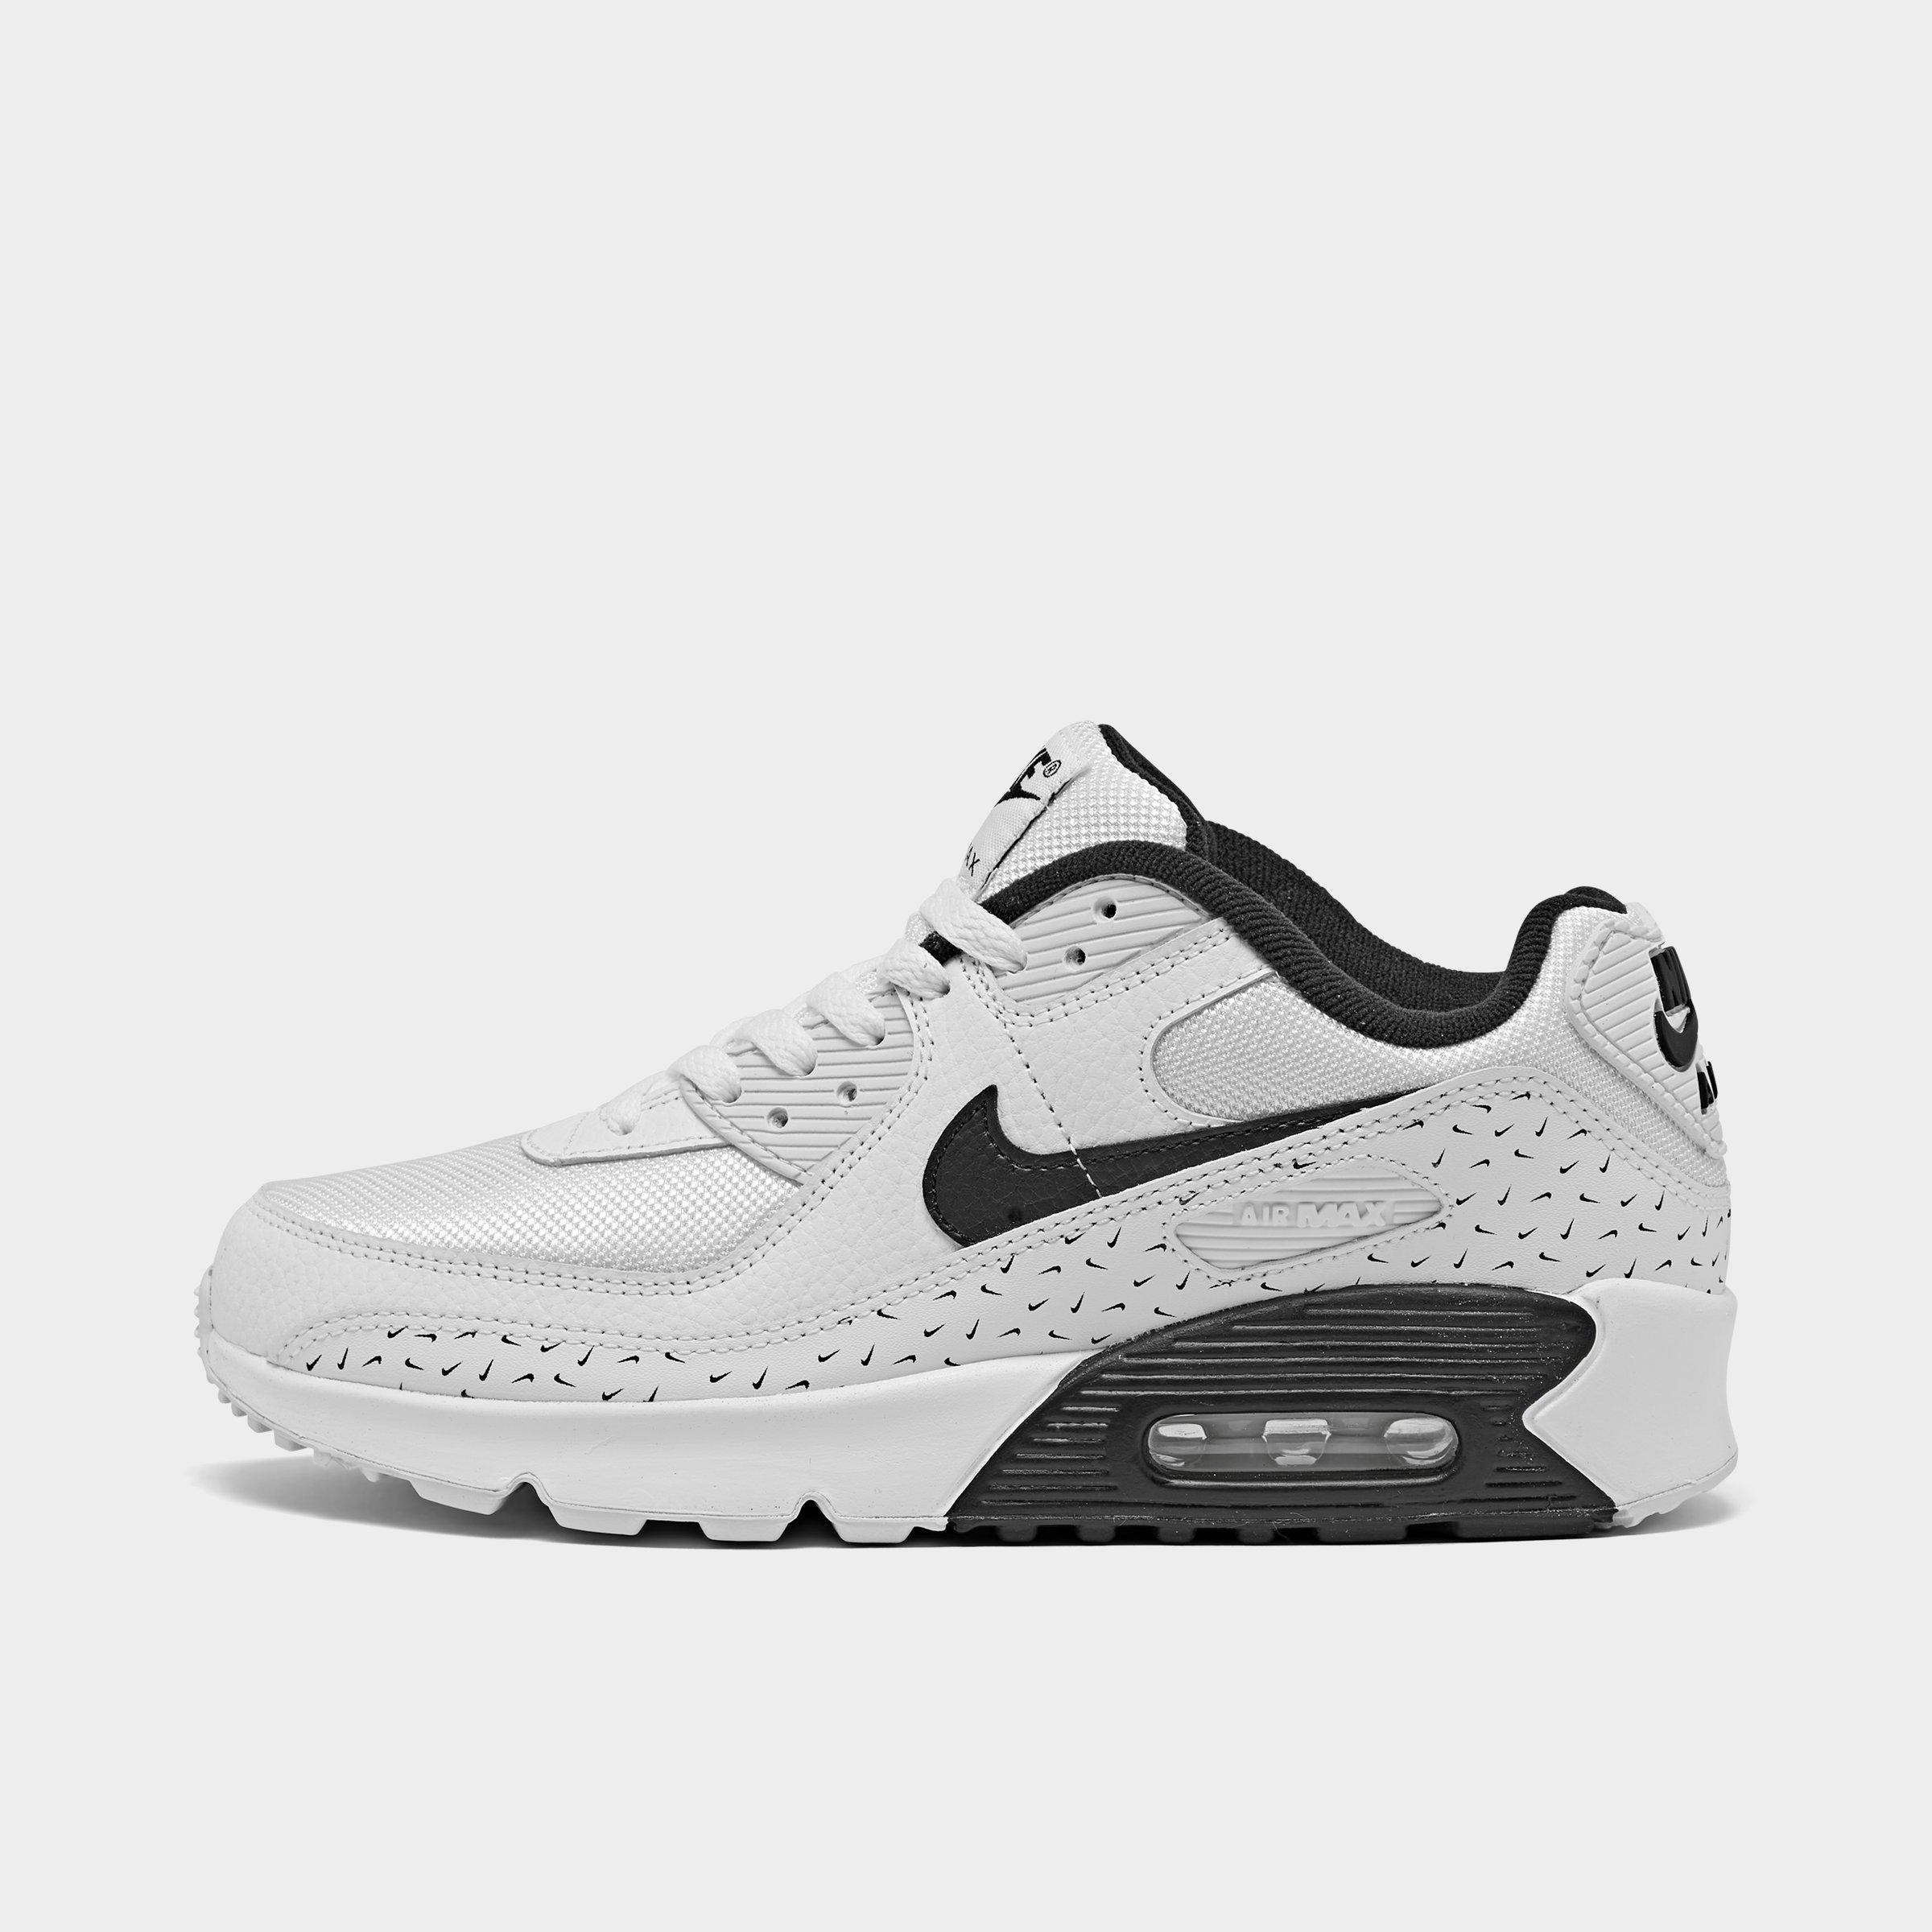 air max 90s white and black